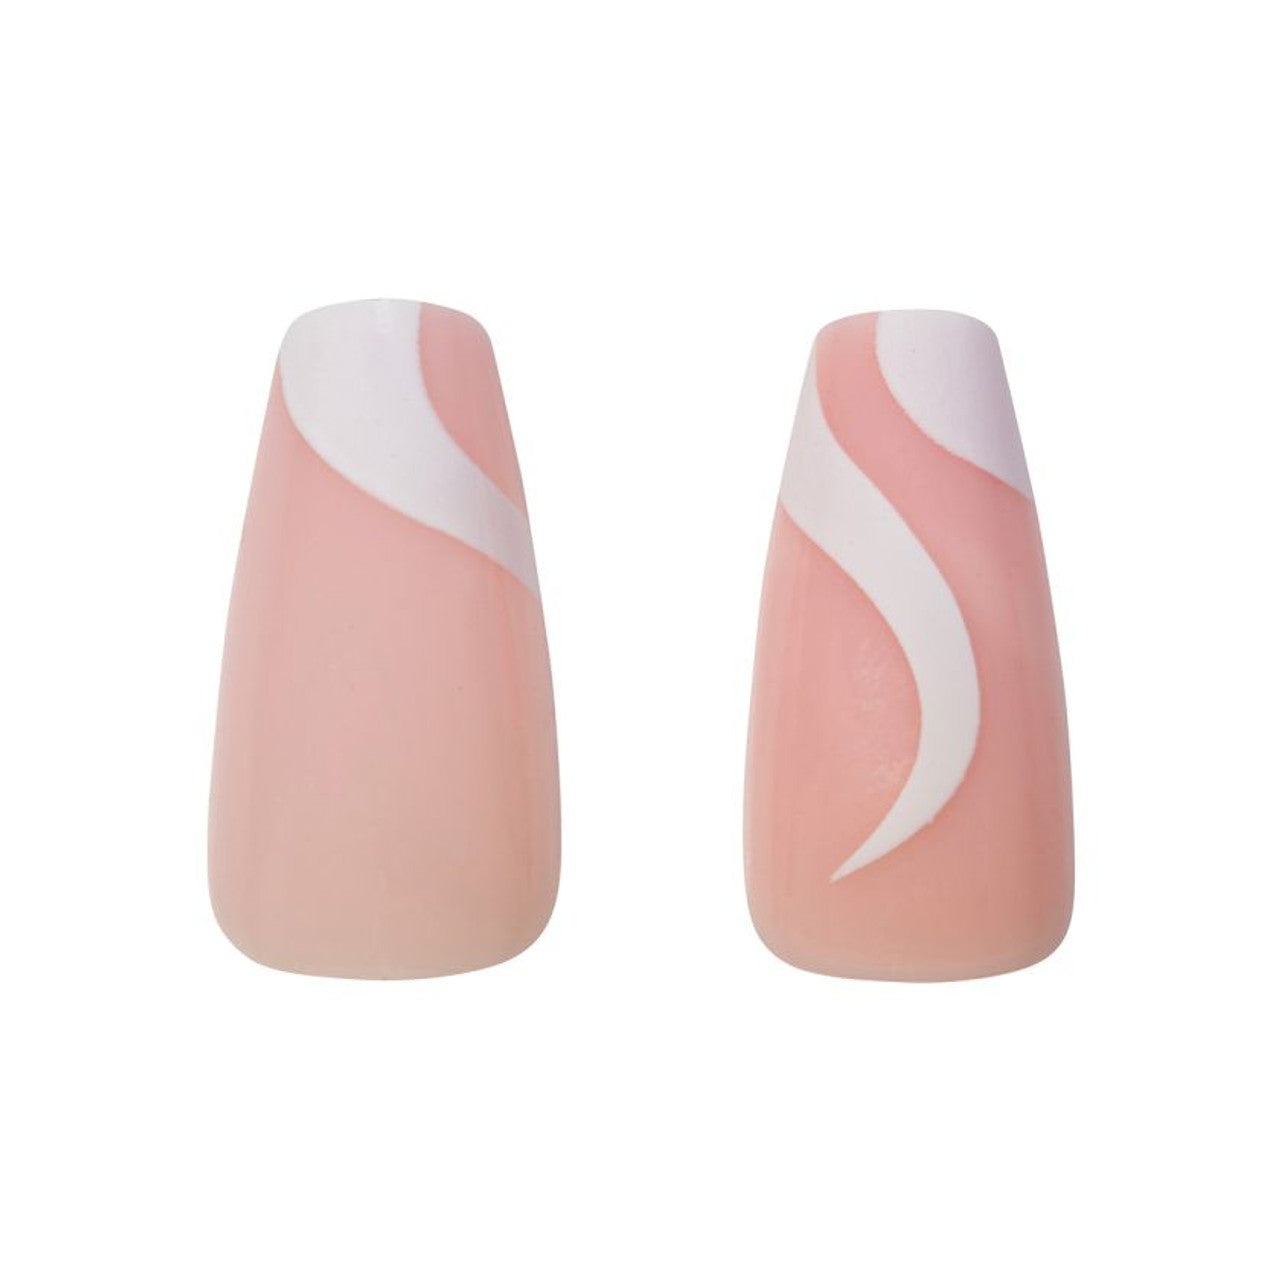 Cala - Glam Couture Coffin Swirls Press On Nails